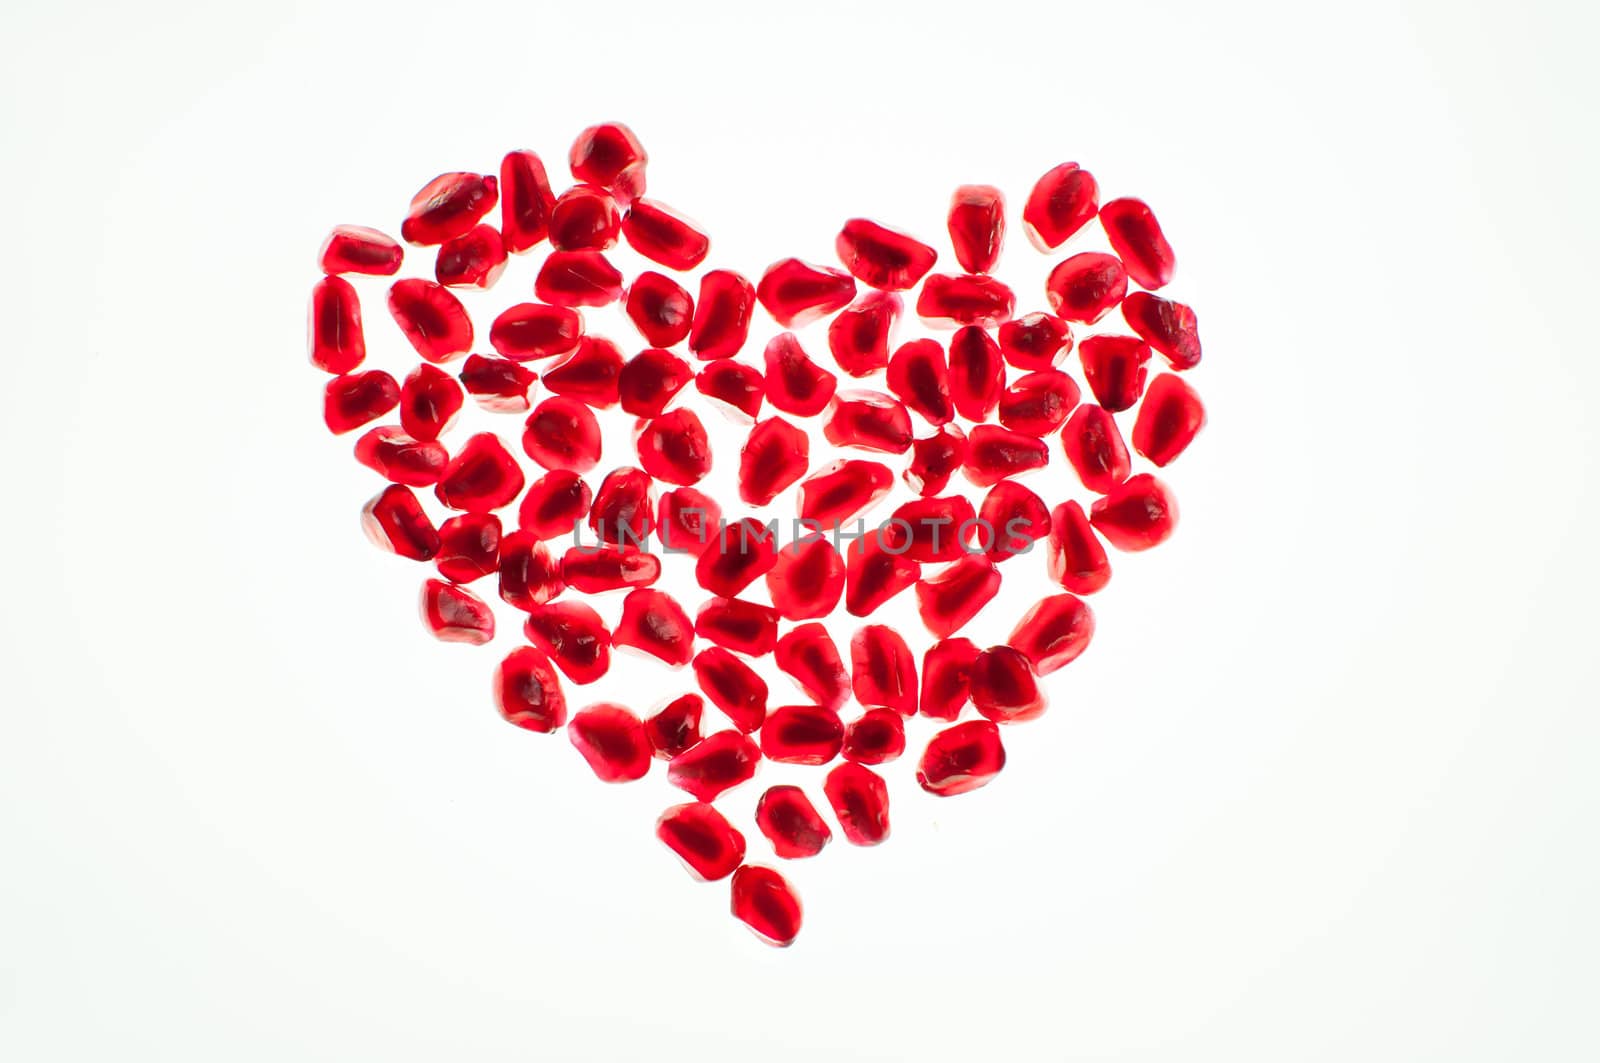 heart shape made by pomegranate seeds isolated on white